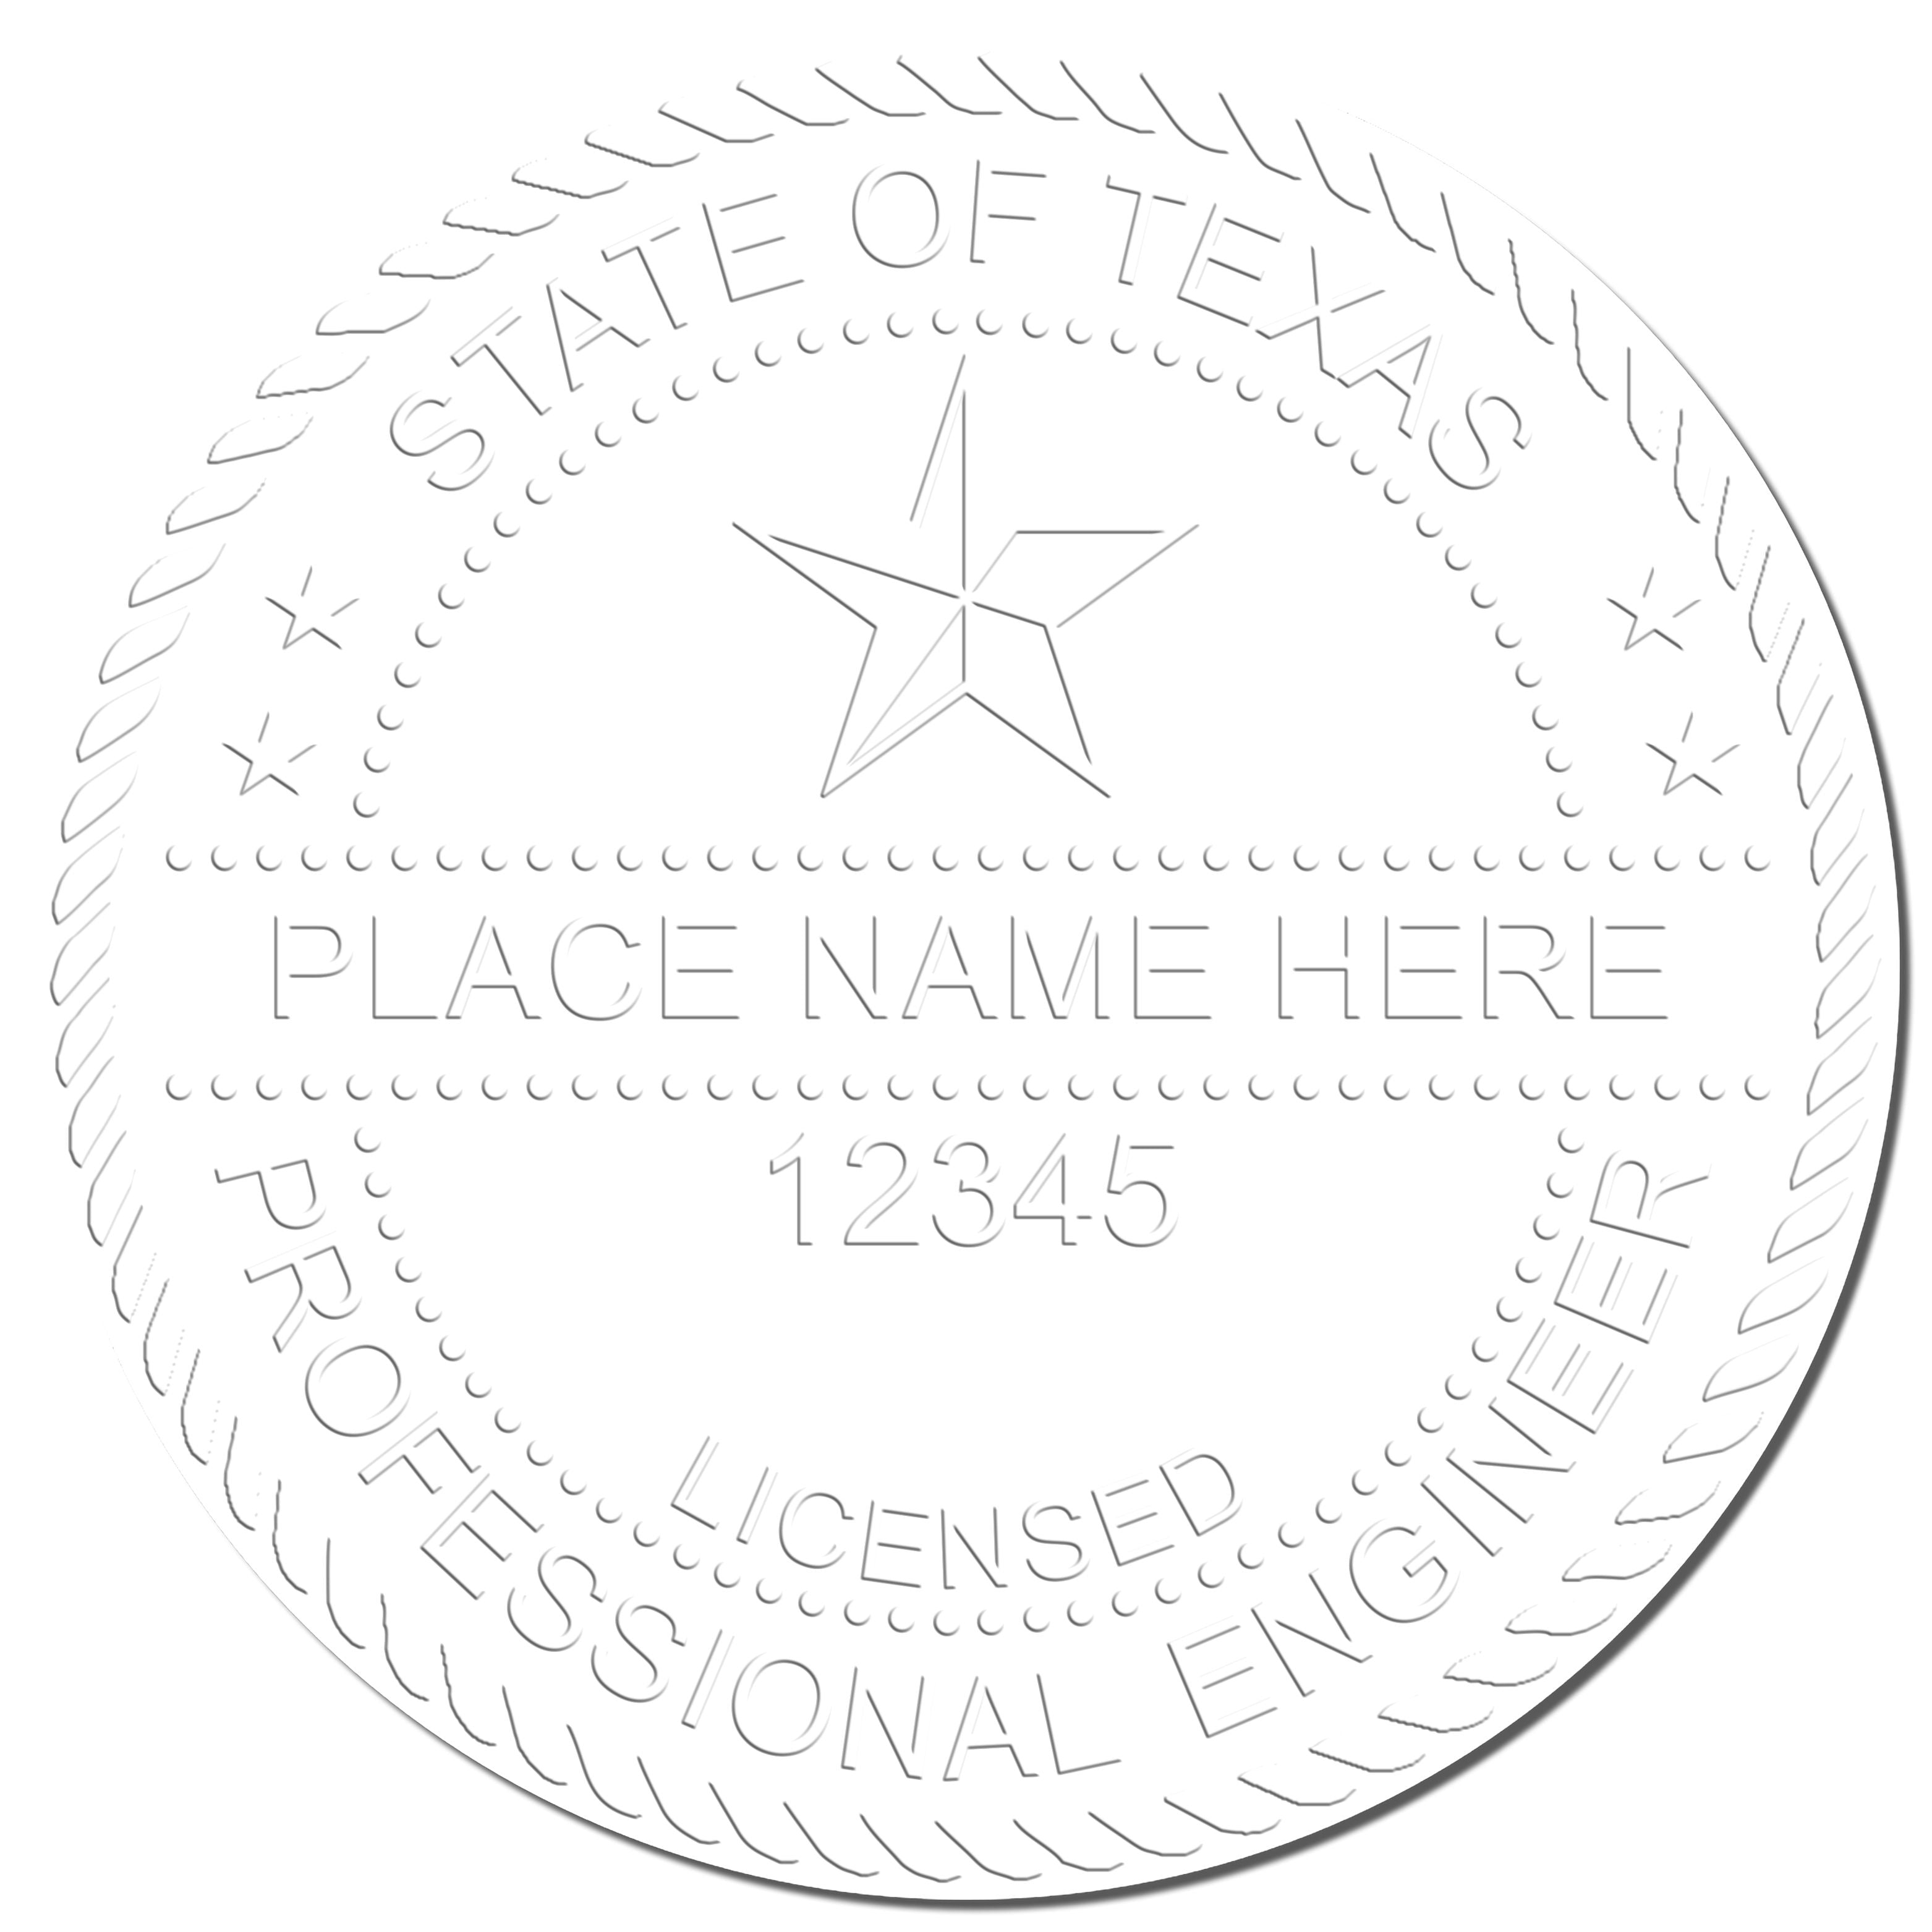 This paper is stamped with a sample imprint of the Gift Texas Engineer Seal, signifying its quality and reliability.